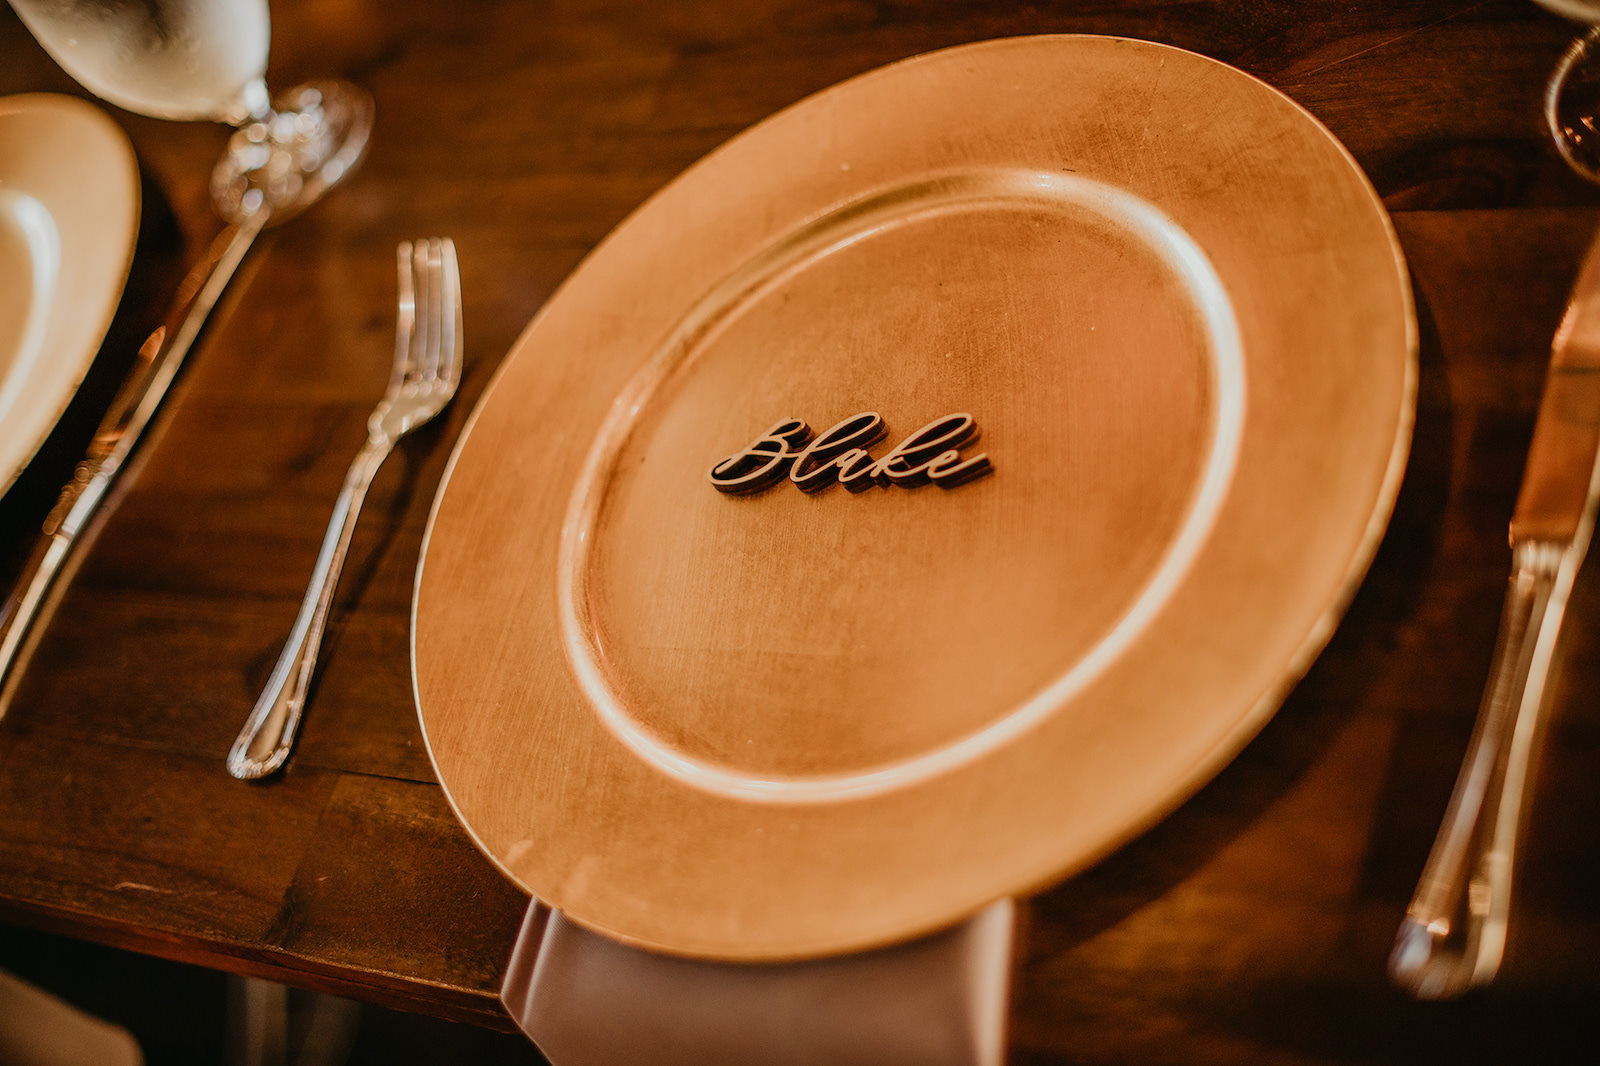 Gold Charger with Wooden Place Card Name | Wedding Reception Decor